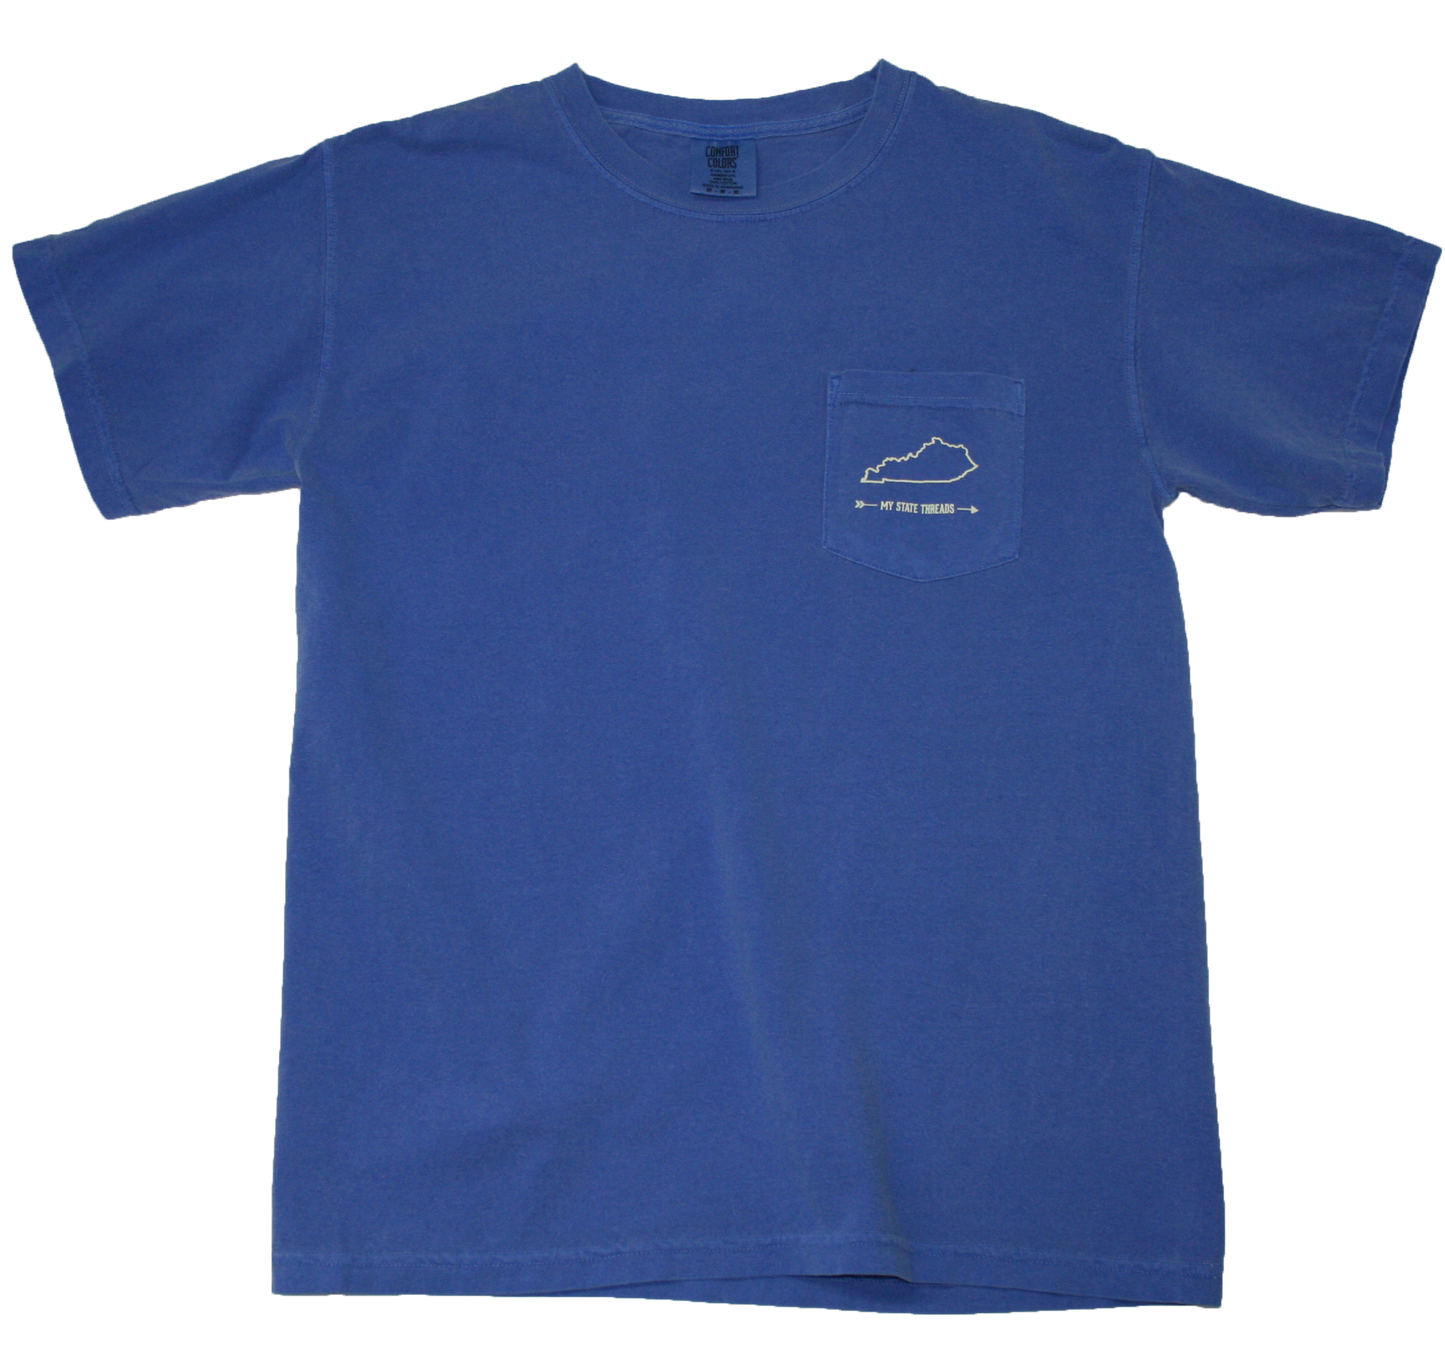 KENTUCKY BLUE POCKET TEE | OUTLINE | PALE YELLOW